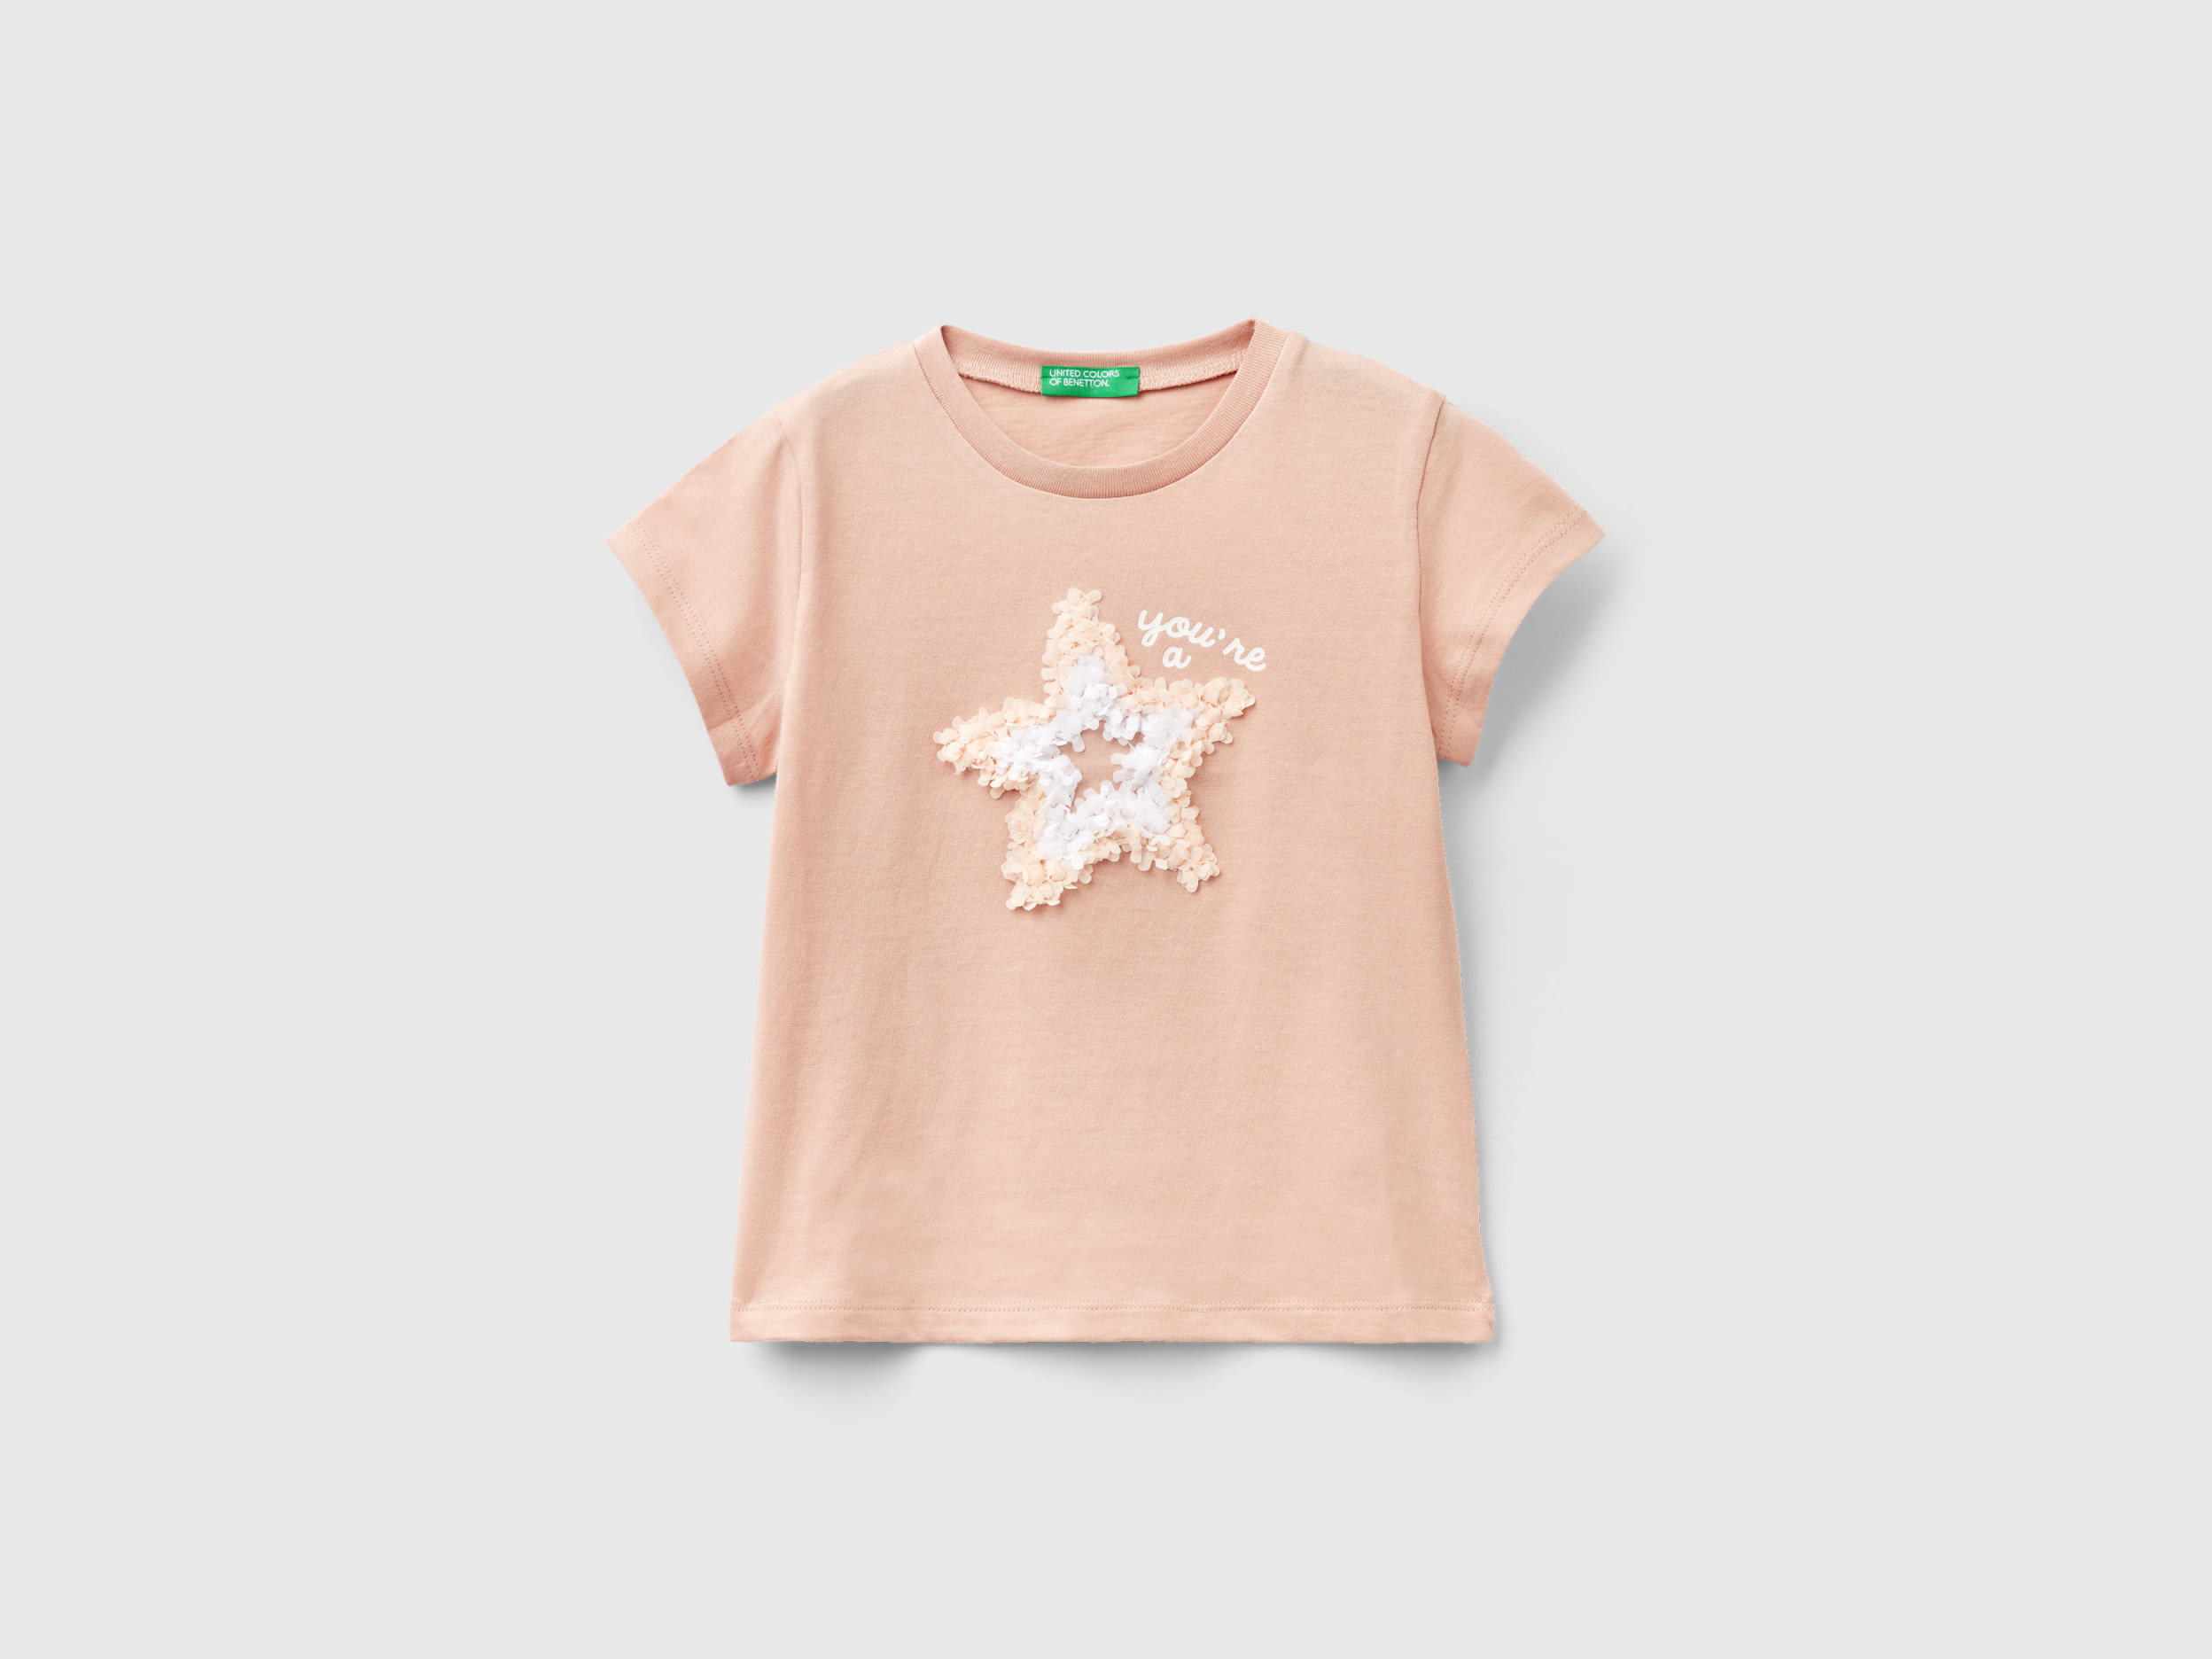 Image of Benetton, T-shirt With Petal Effect Applique, size 104, Soft Pink, Kids